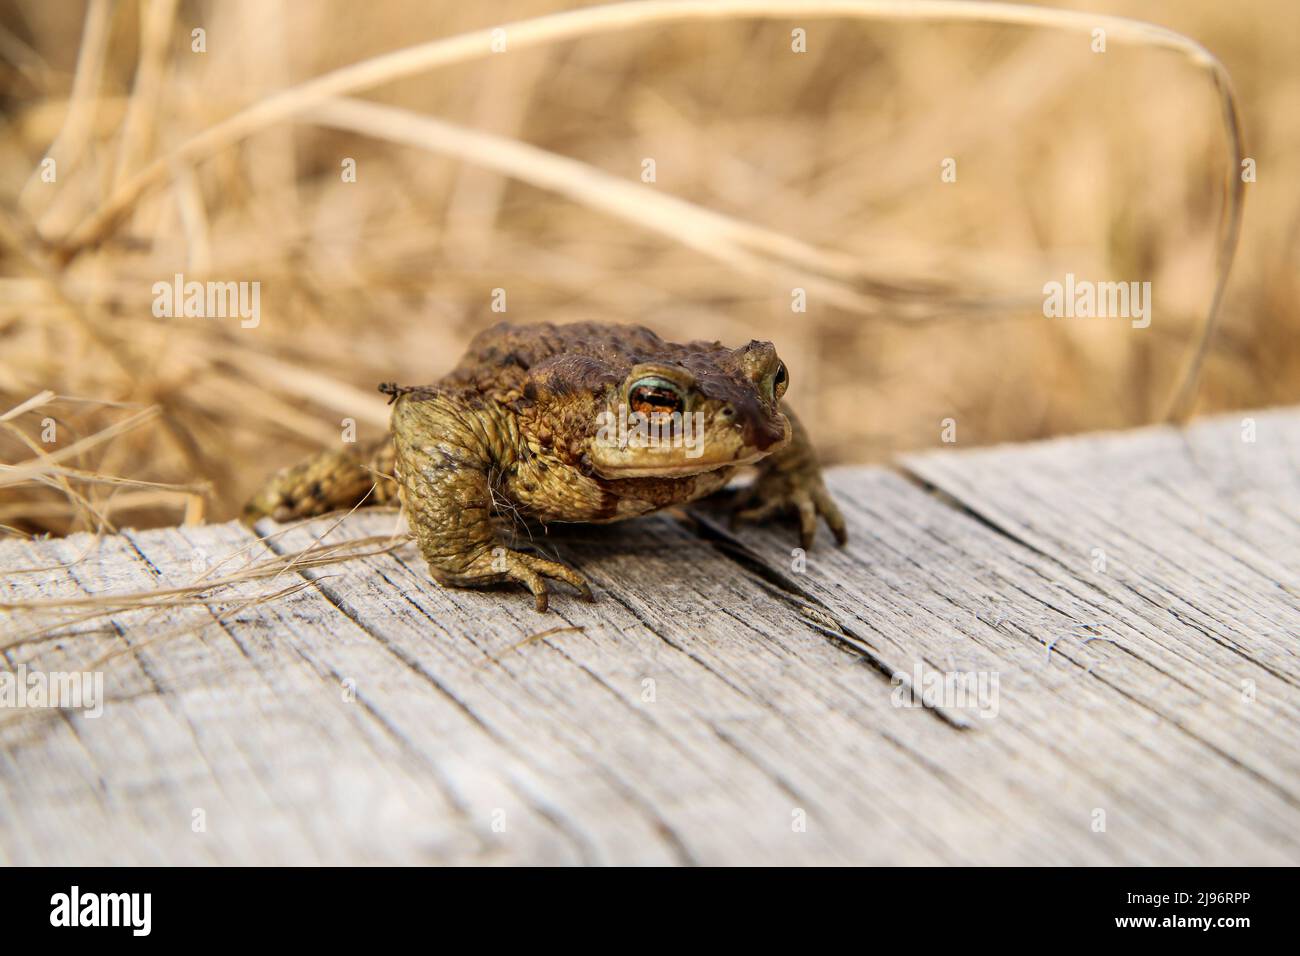 The detail of the big brown toad standing on the wood with googly eyes. Stock Photo